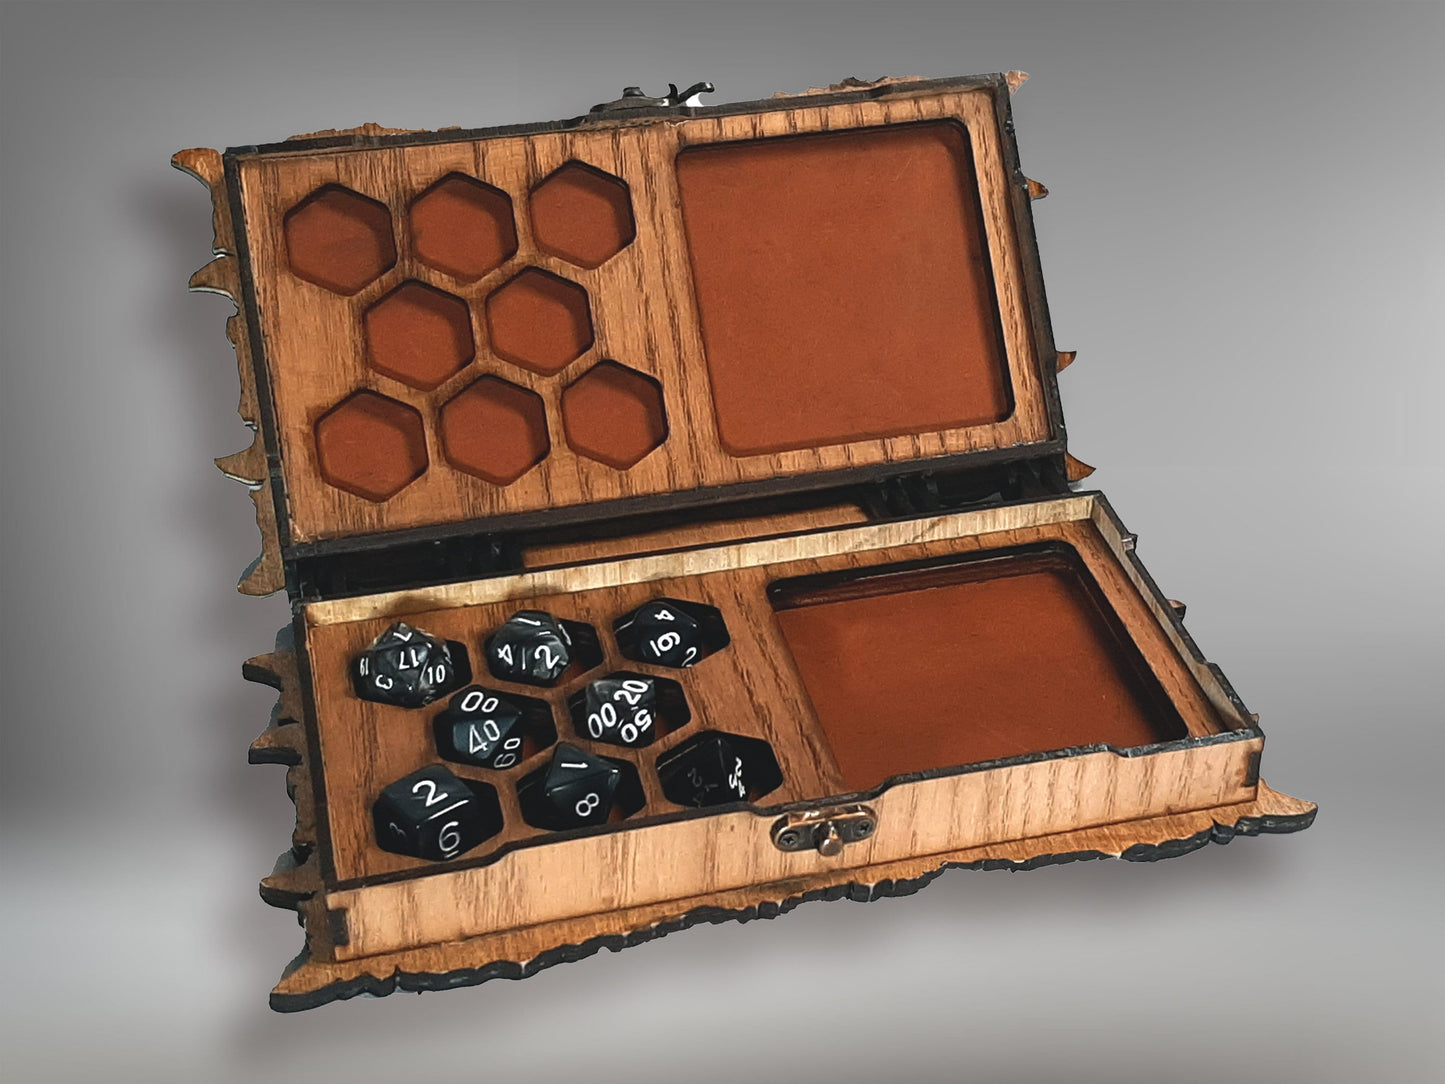 Premium Hero's Dice Box/Book Box - Gaming accessory, Dice Tray, Dice container for Dungeons and Dragons and other Role Playing Games